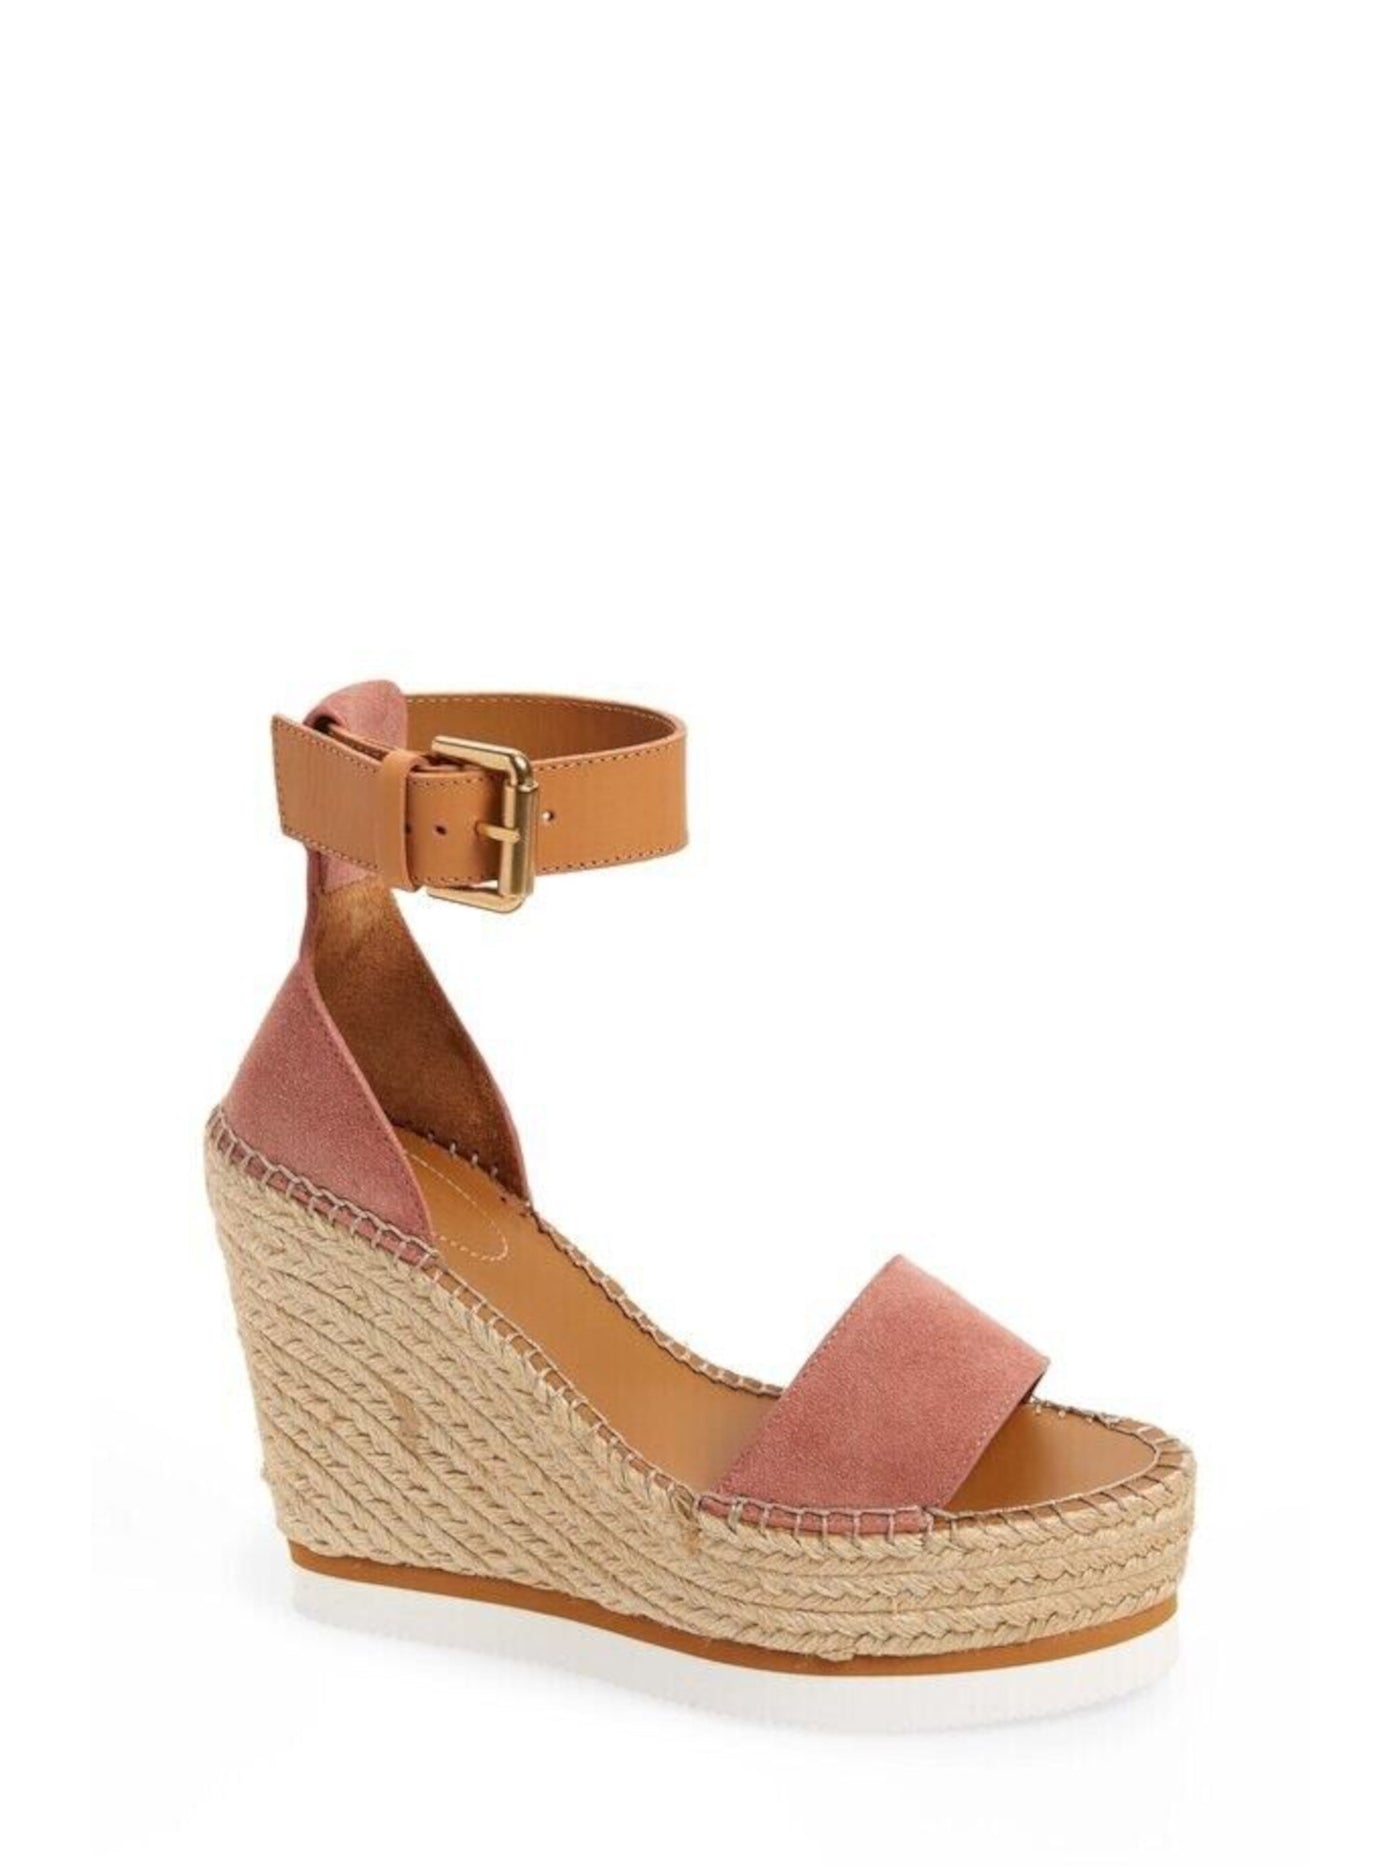 SEE BY CHLOE Womens Pink Ankle Strap Woven Glyn Round Toe Wedge Buckle Leather Espadrille Shoes 41